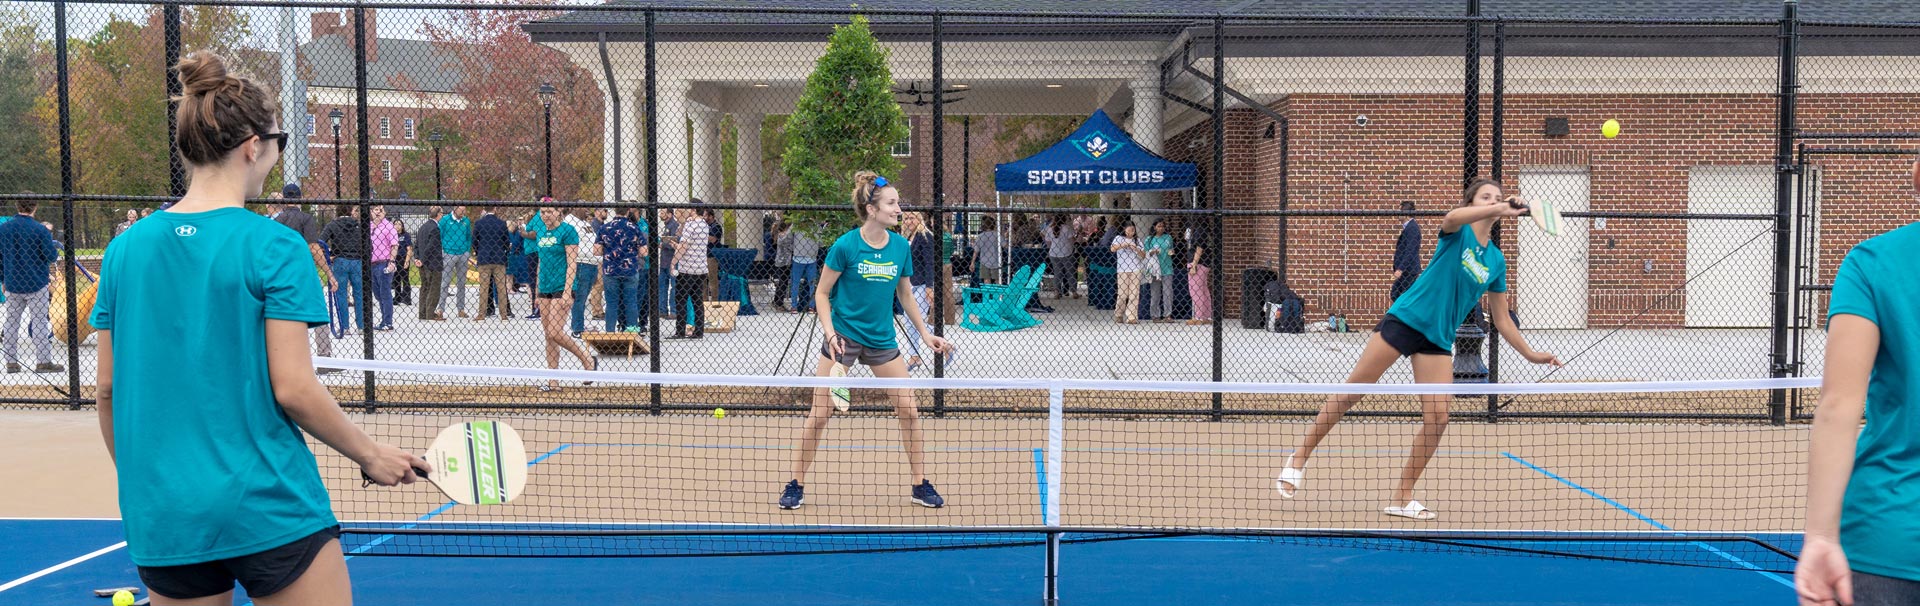 People playing pickleball on tennis courts